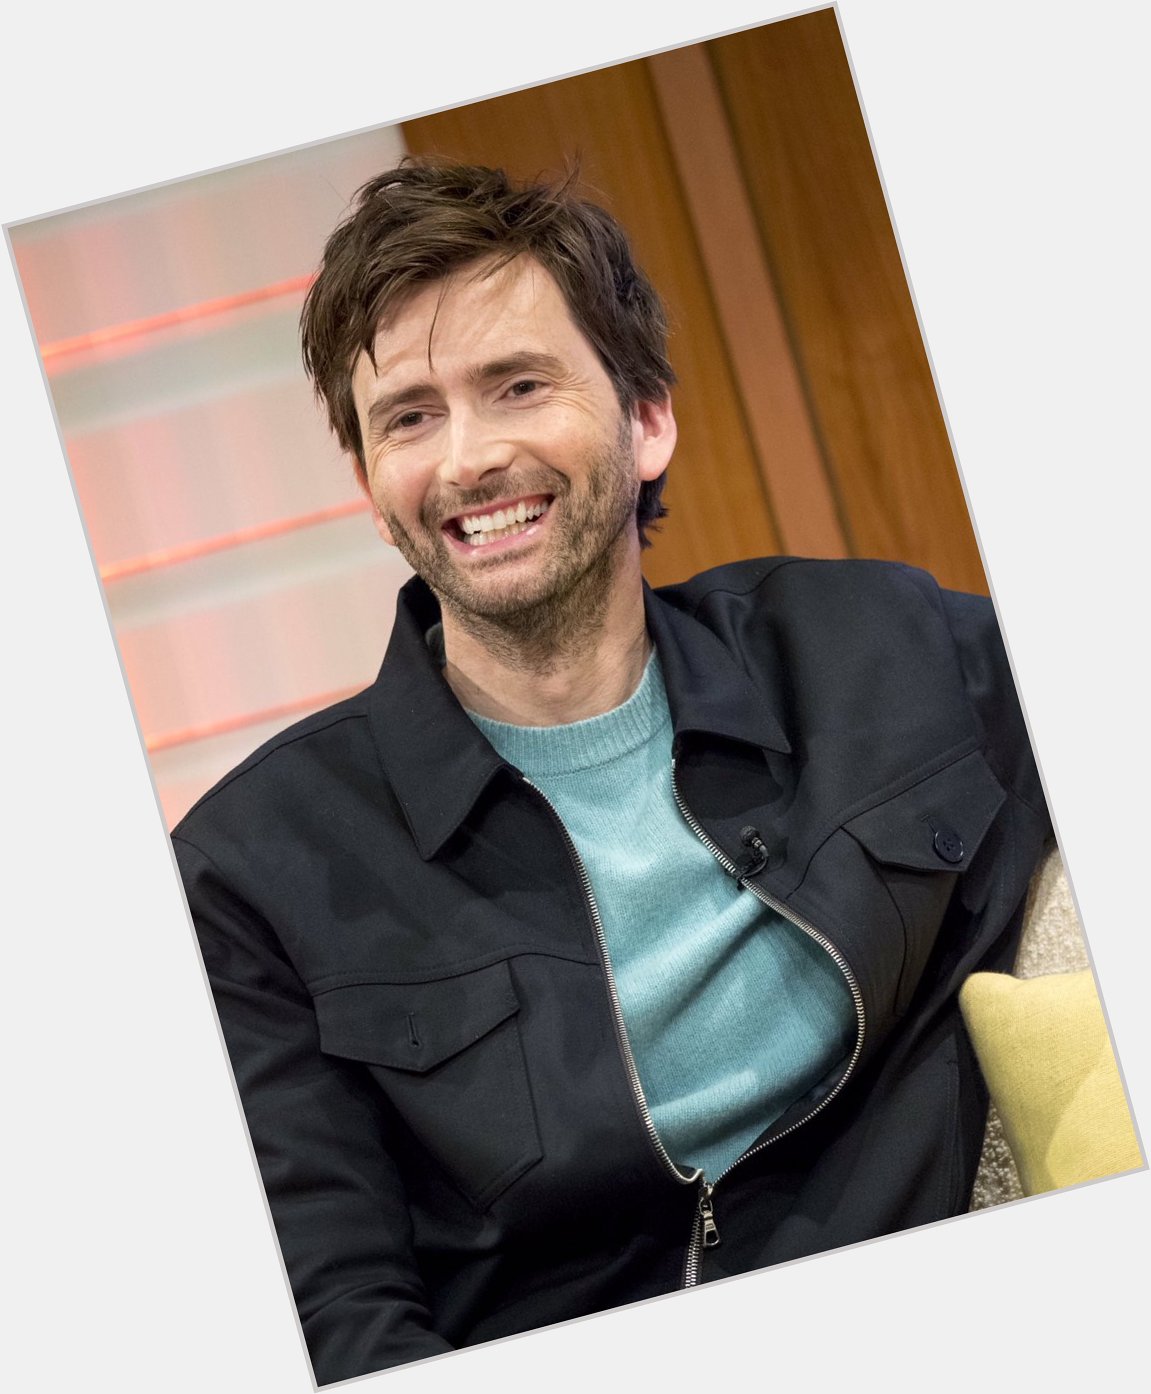 HAPPY BIRTHDAY TO MY FAVE PERSON DAVID TENNANT LOVE YOU LOTS 